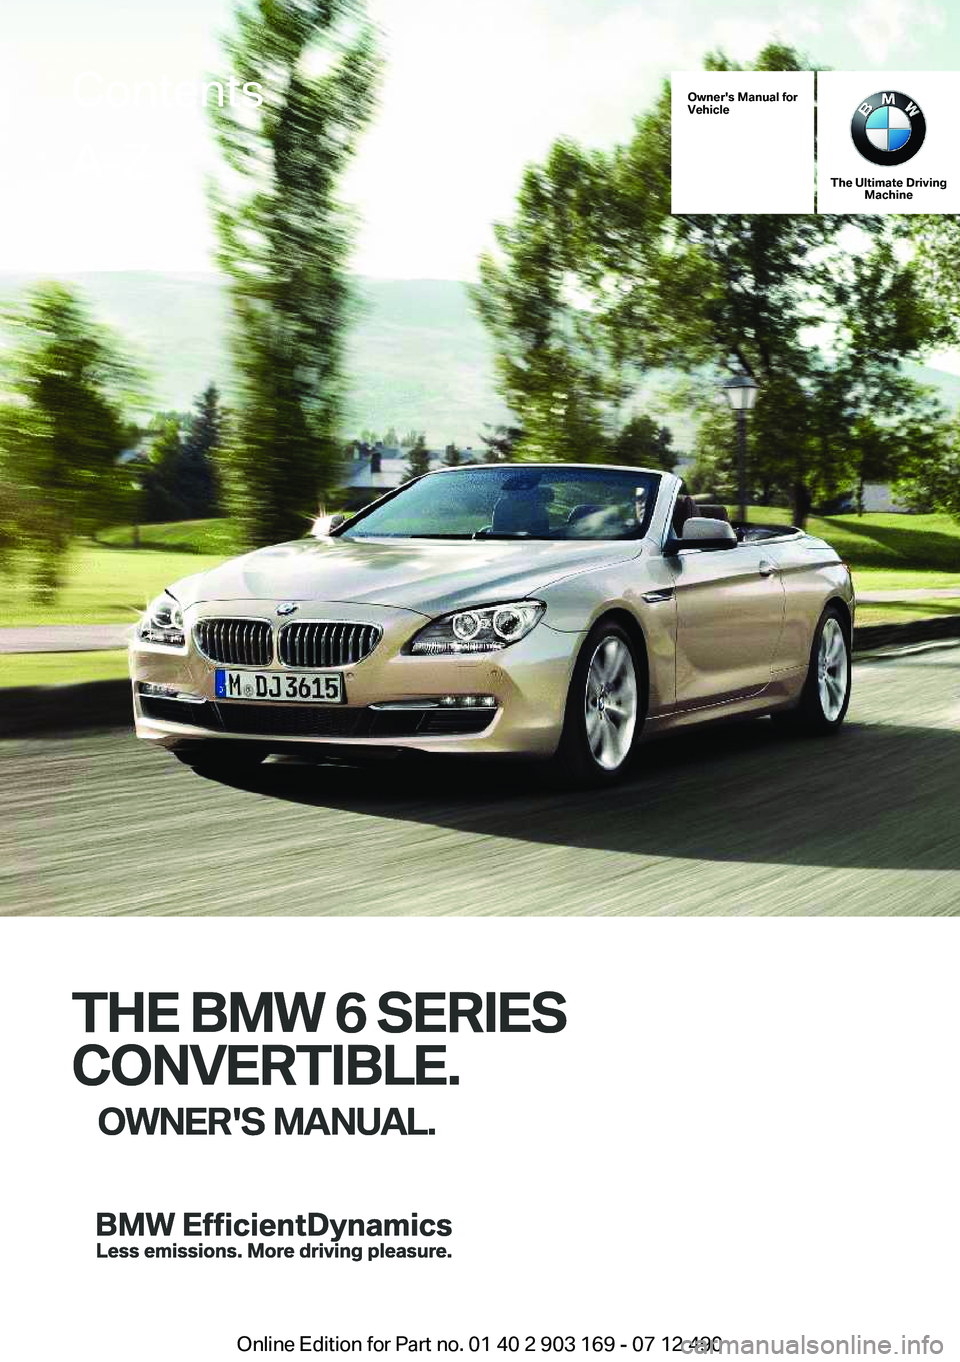 BMW 640I CONVERTIBLE 2013  Owners Manual Owner's Manual for
Vehicle
THE BMW 6 SERIES
CONVERTIBLE. OWNER'S MANUAL.
The Ultimate Driving Machine
THE BMW 6 SERIES
CONVERTIBLE. OWNER'S MANUAL.
ContentsA-Z
Online Edition for Part no. 